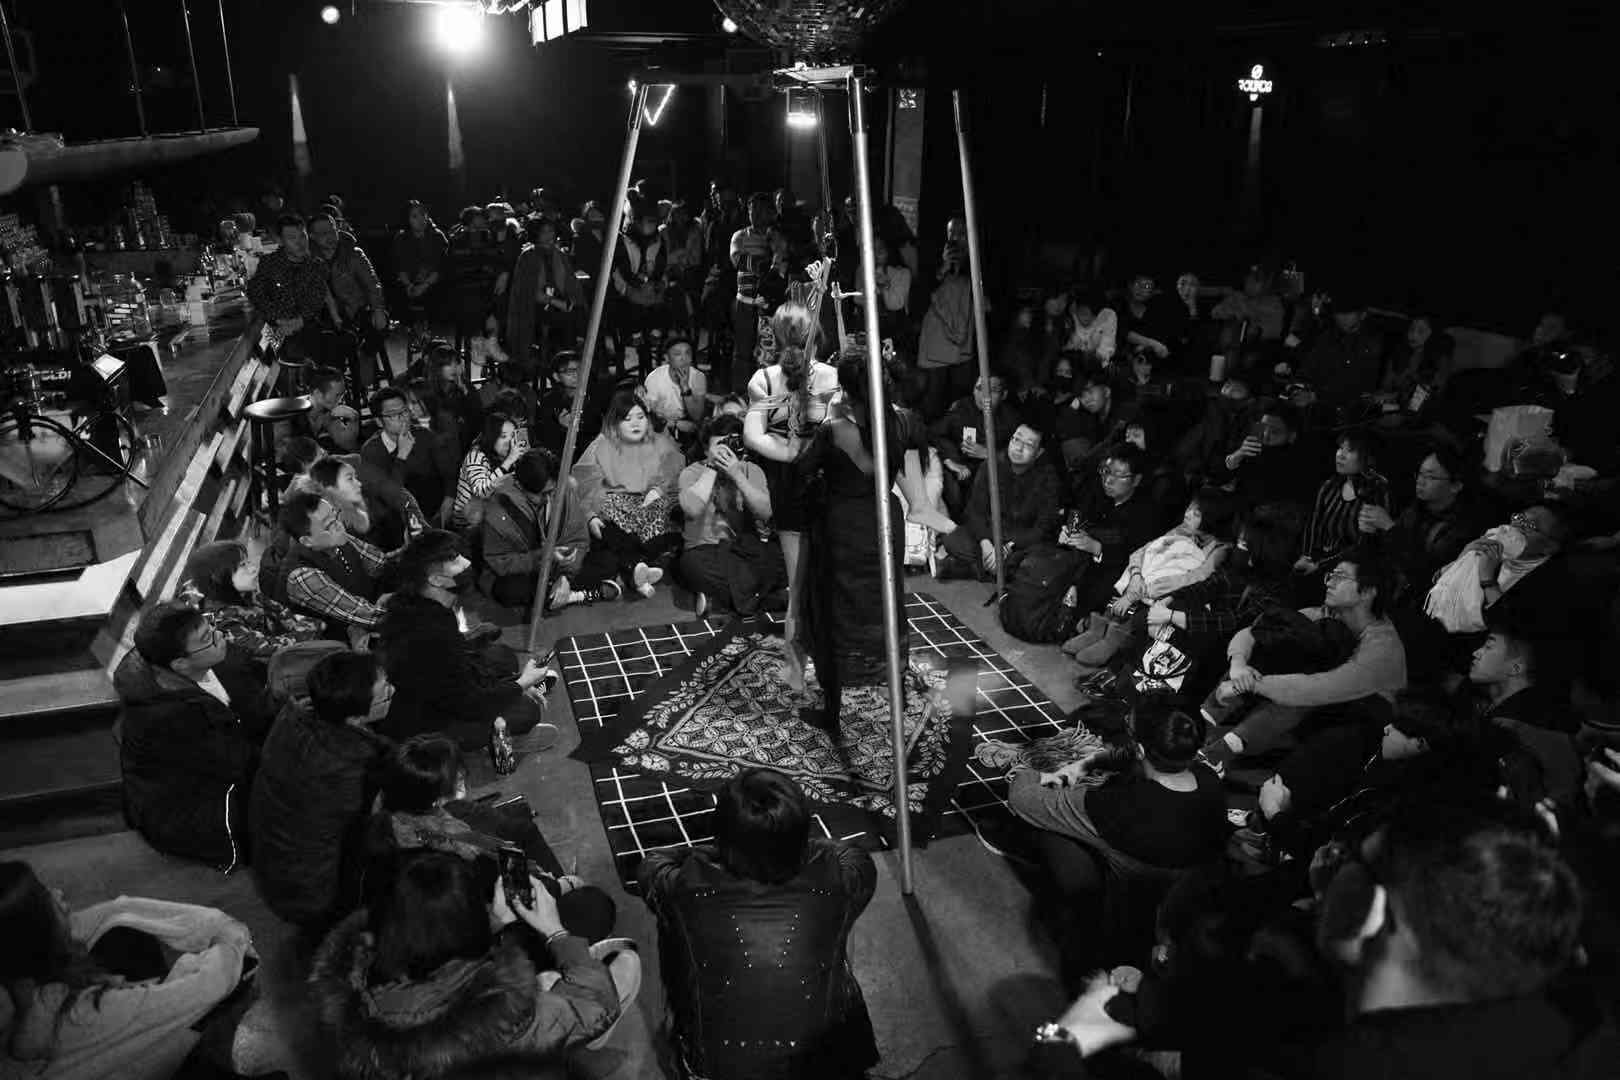 A bondage demonstration in front of an audience in Tianjin.